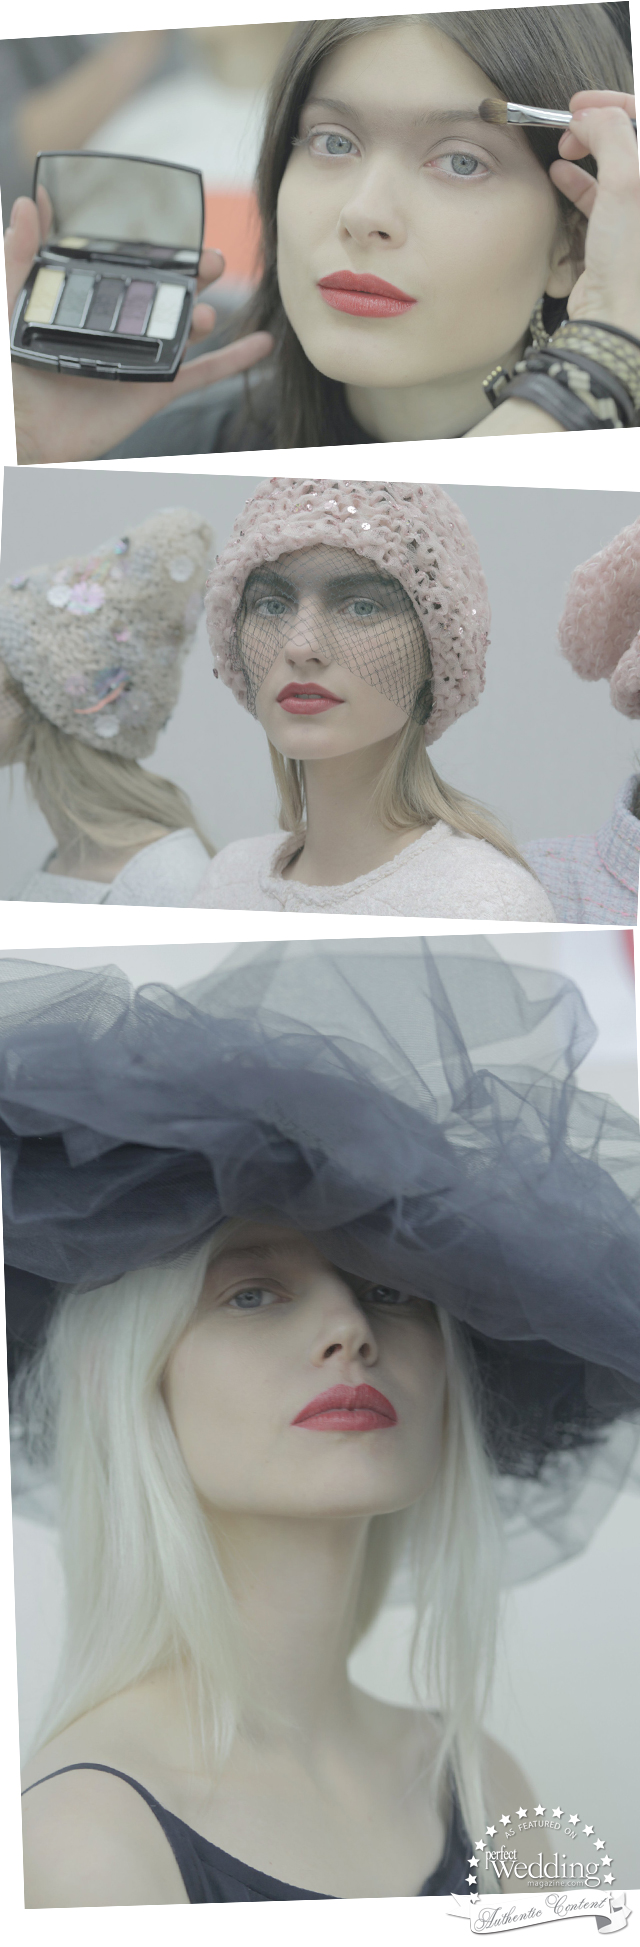 Chanel, Chanel Makeup, Chanel SpringSummer 2015 Haute Couture collection, Perfect Wedding Magazine, Spring Makeup Bridal trends